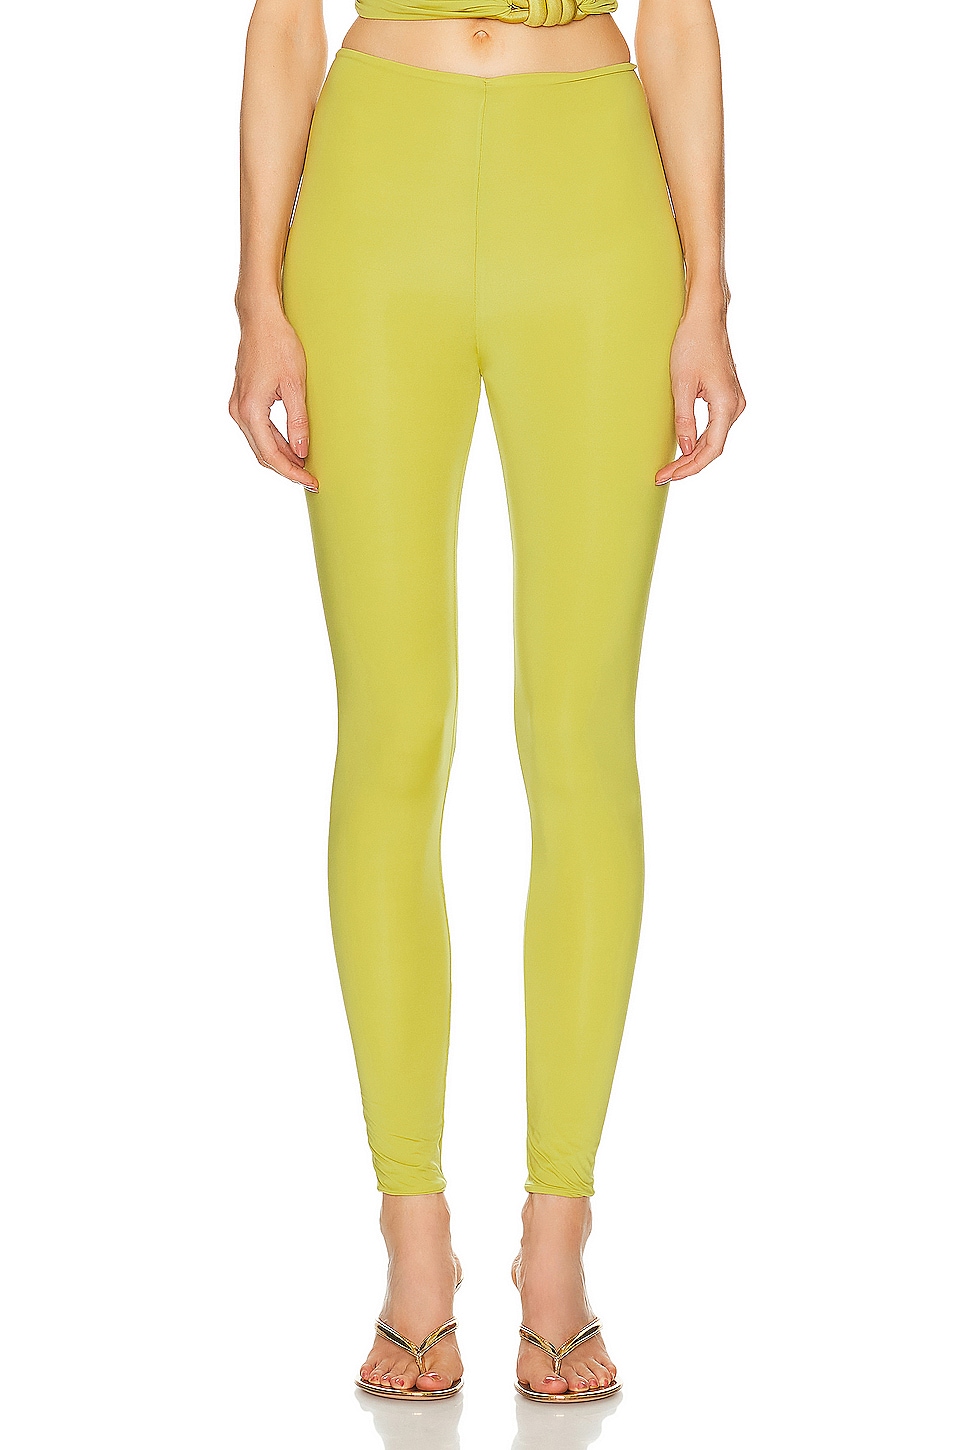 Image 1 of Maygel Coronel Galera Pant in Oaisis Green